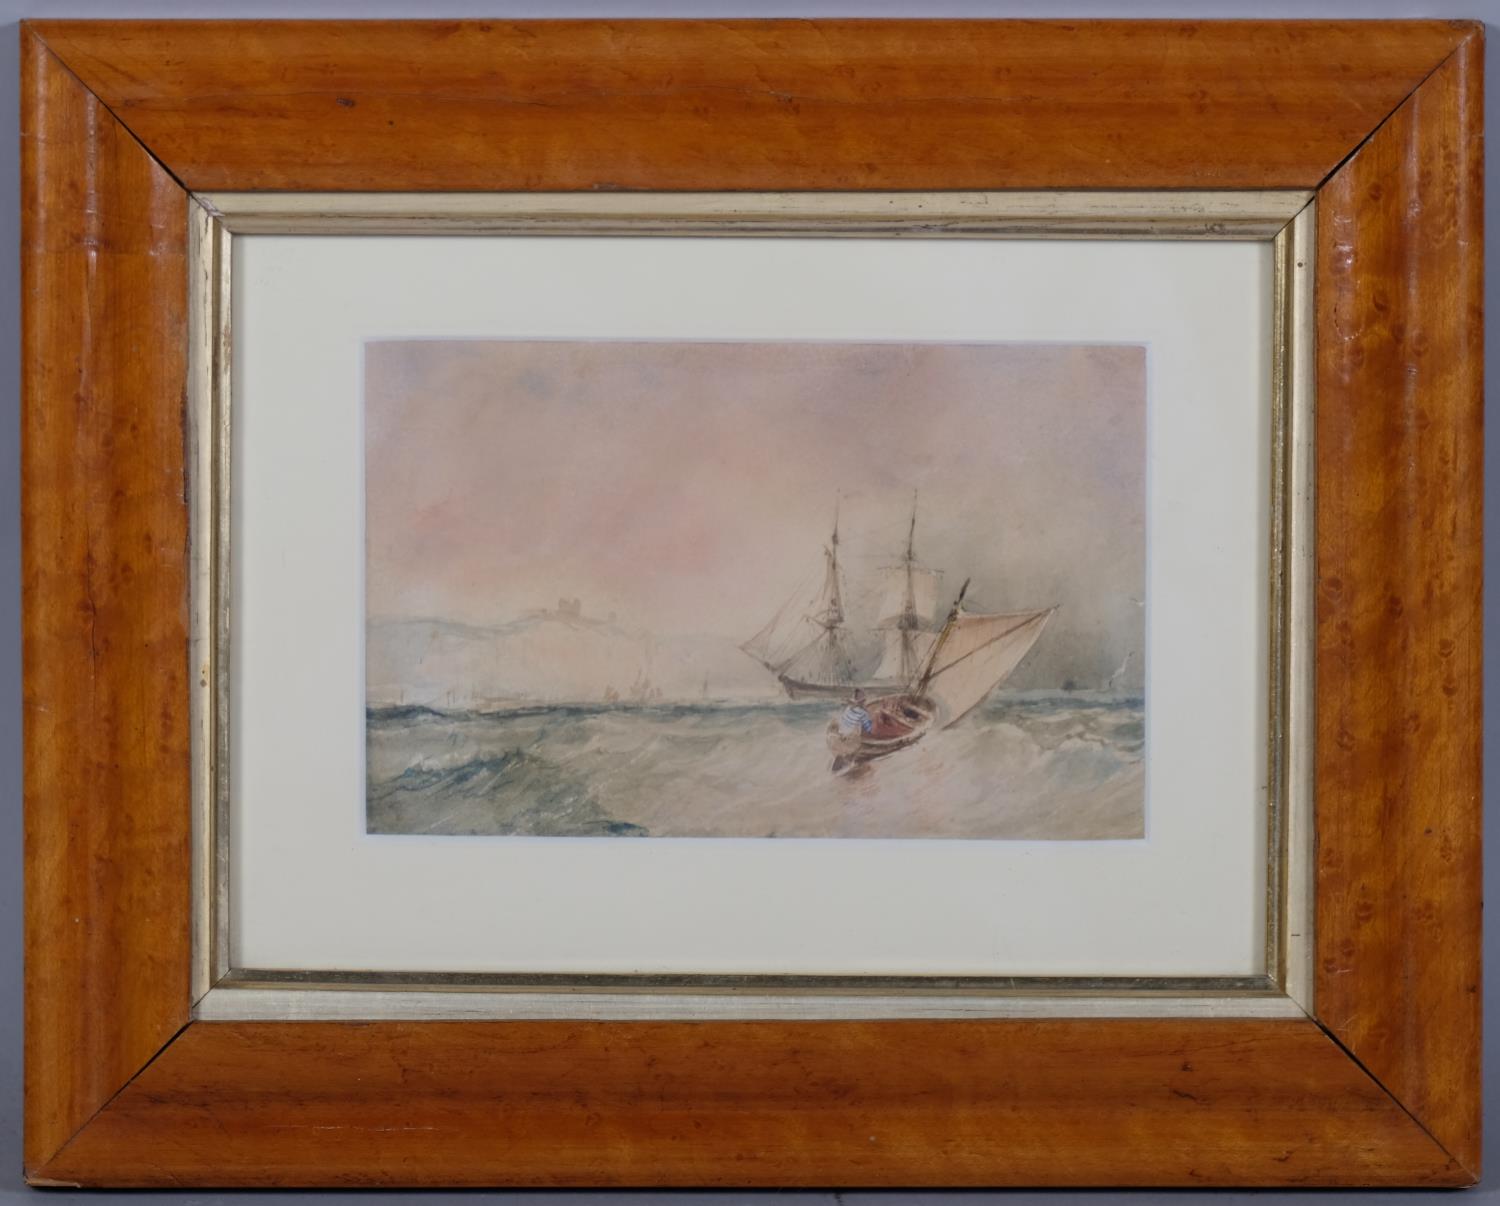 Shipping off the Dover coast, 19th century watercolour, unsigned, 10cm x 16cm, framed Good condition - Image 2 of 4